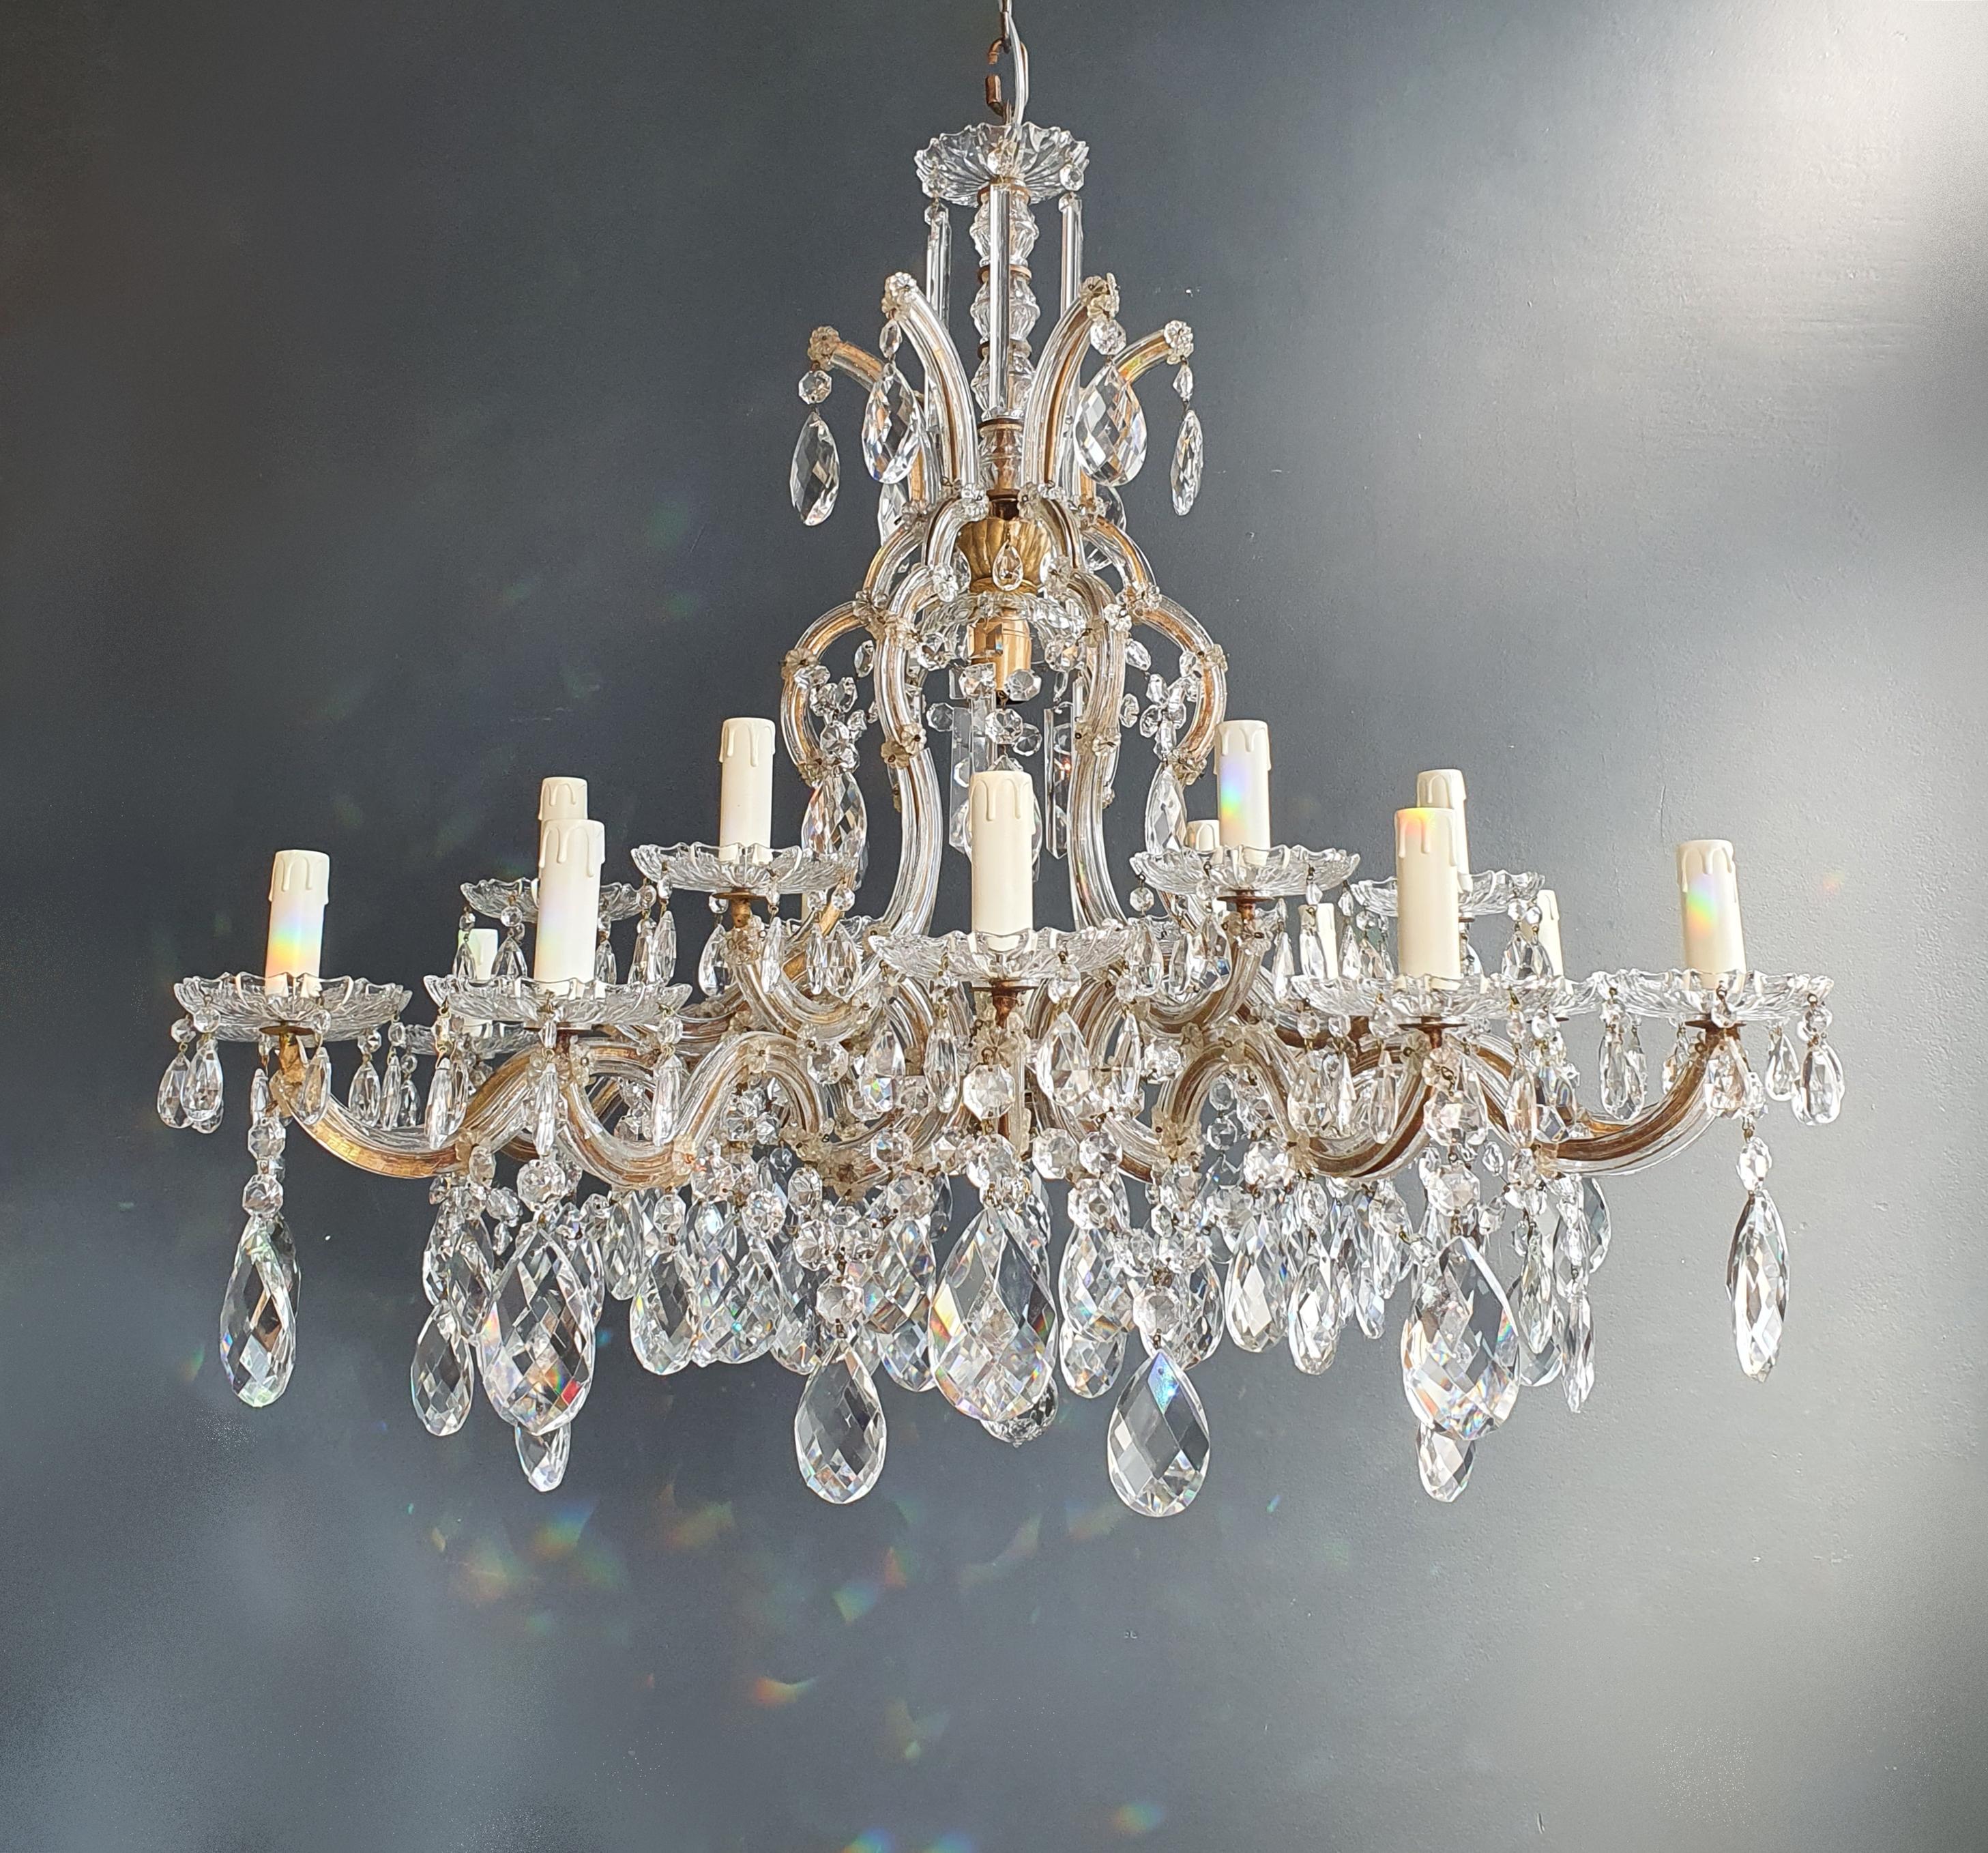 18th Century Maria Theresa Crystal Chandelier Antique Clear Classic Lustre